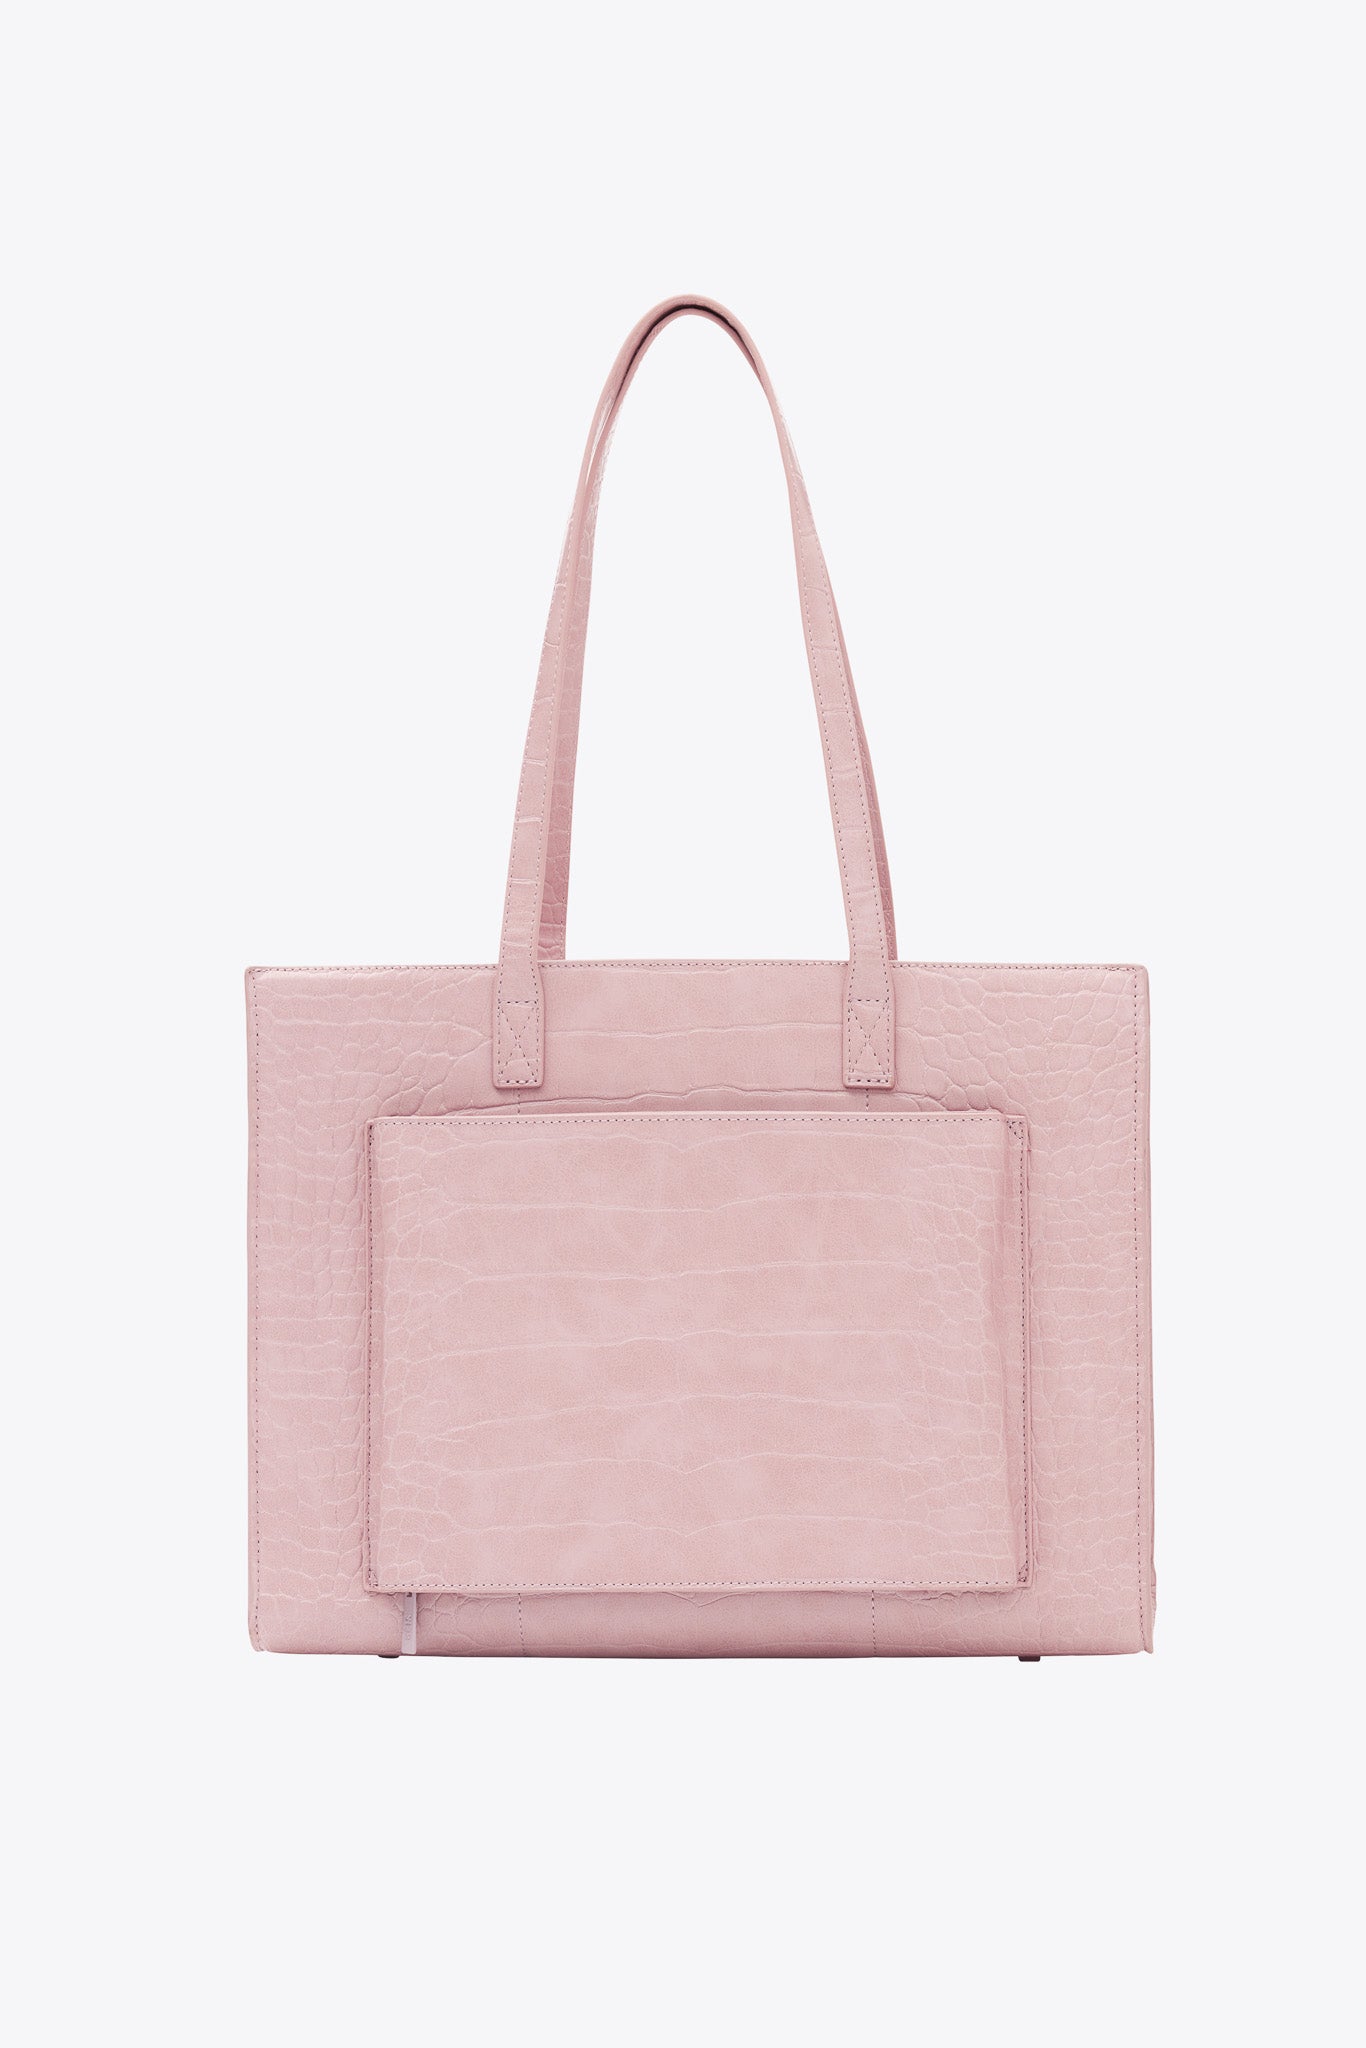 The Work Tote in Atlas Pink